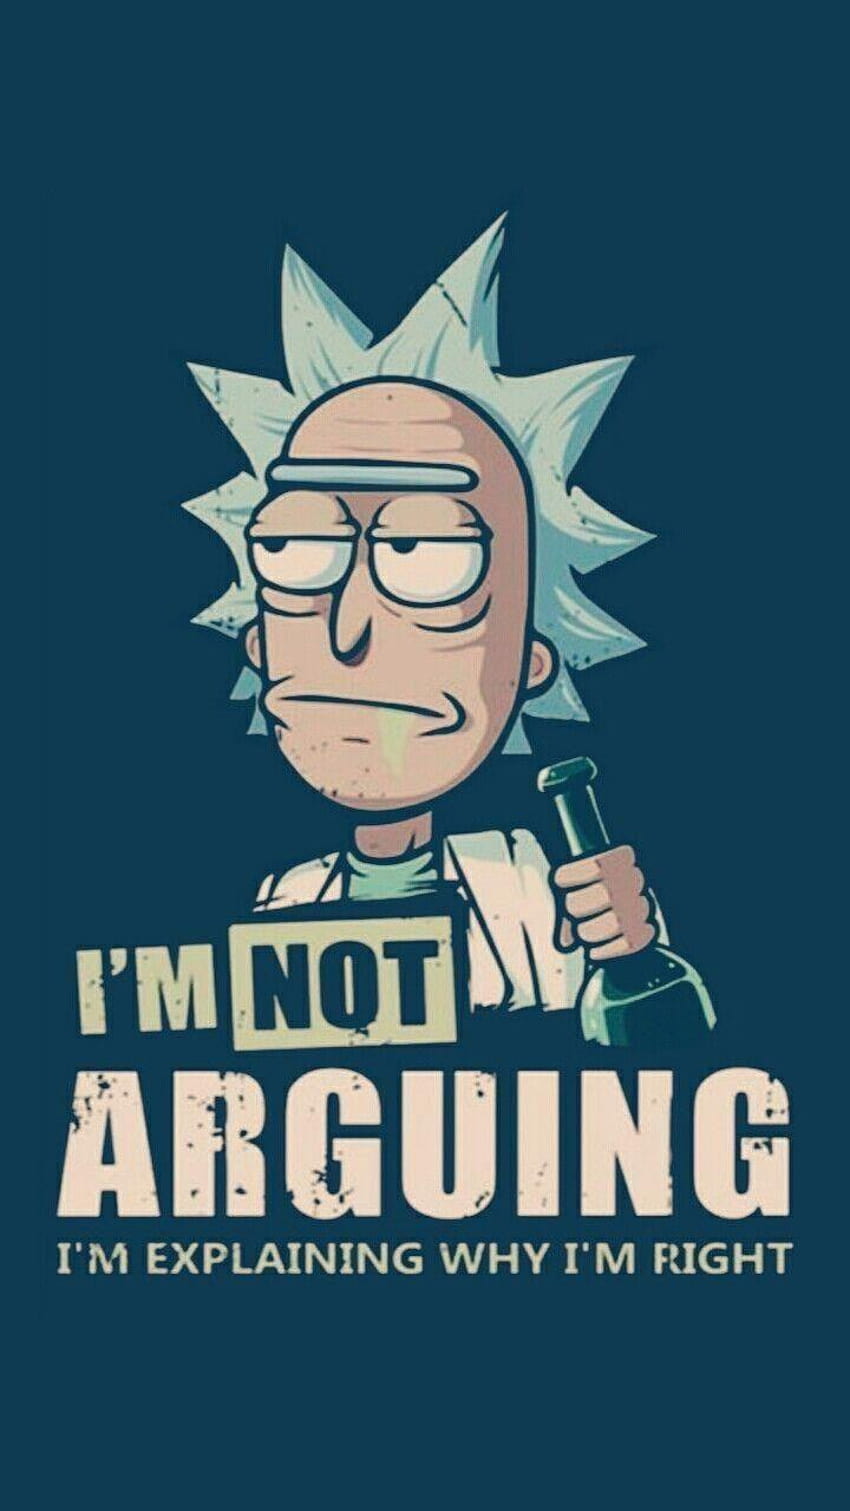 Rick sanchez by rxssoap1 now. Browse, rick and morty quotes HD phone wallpaper